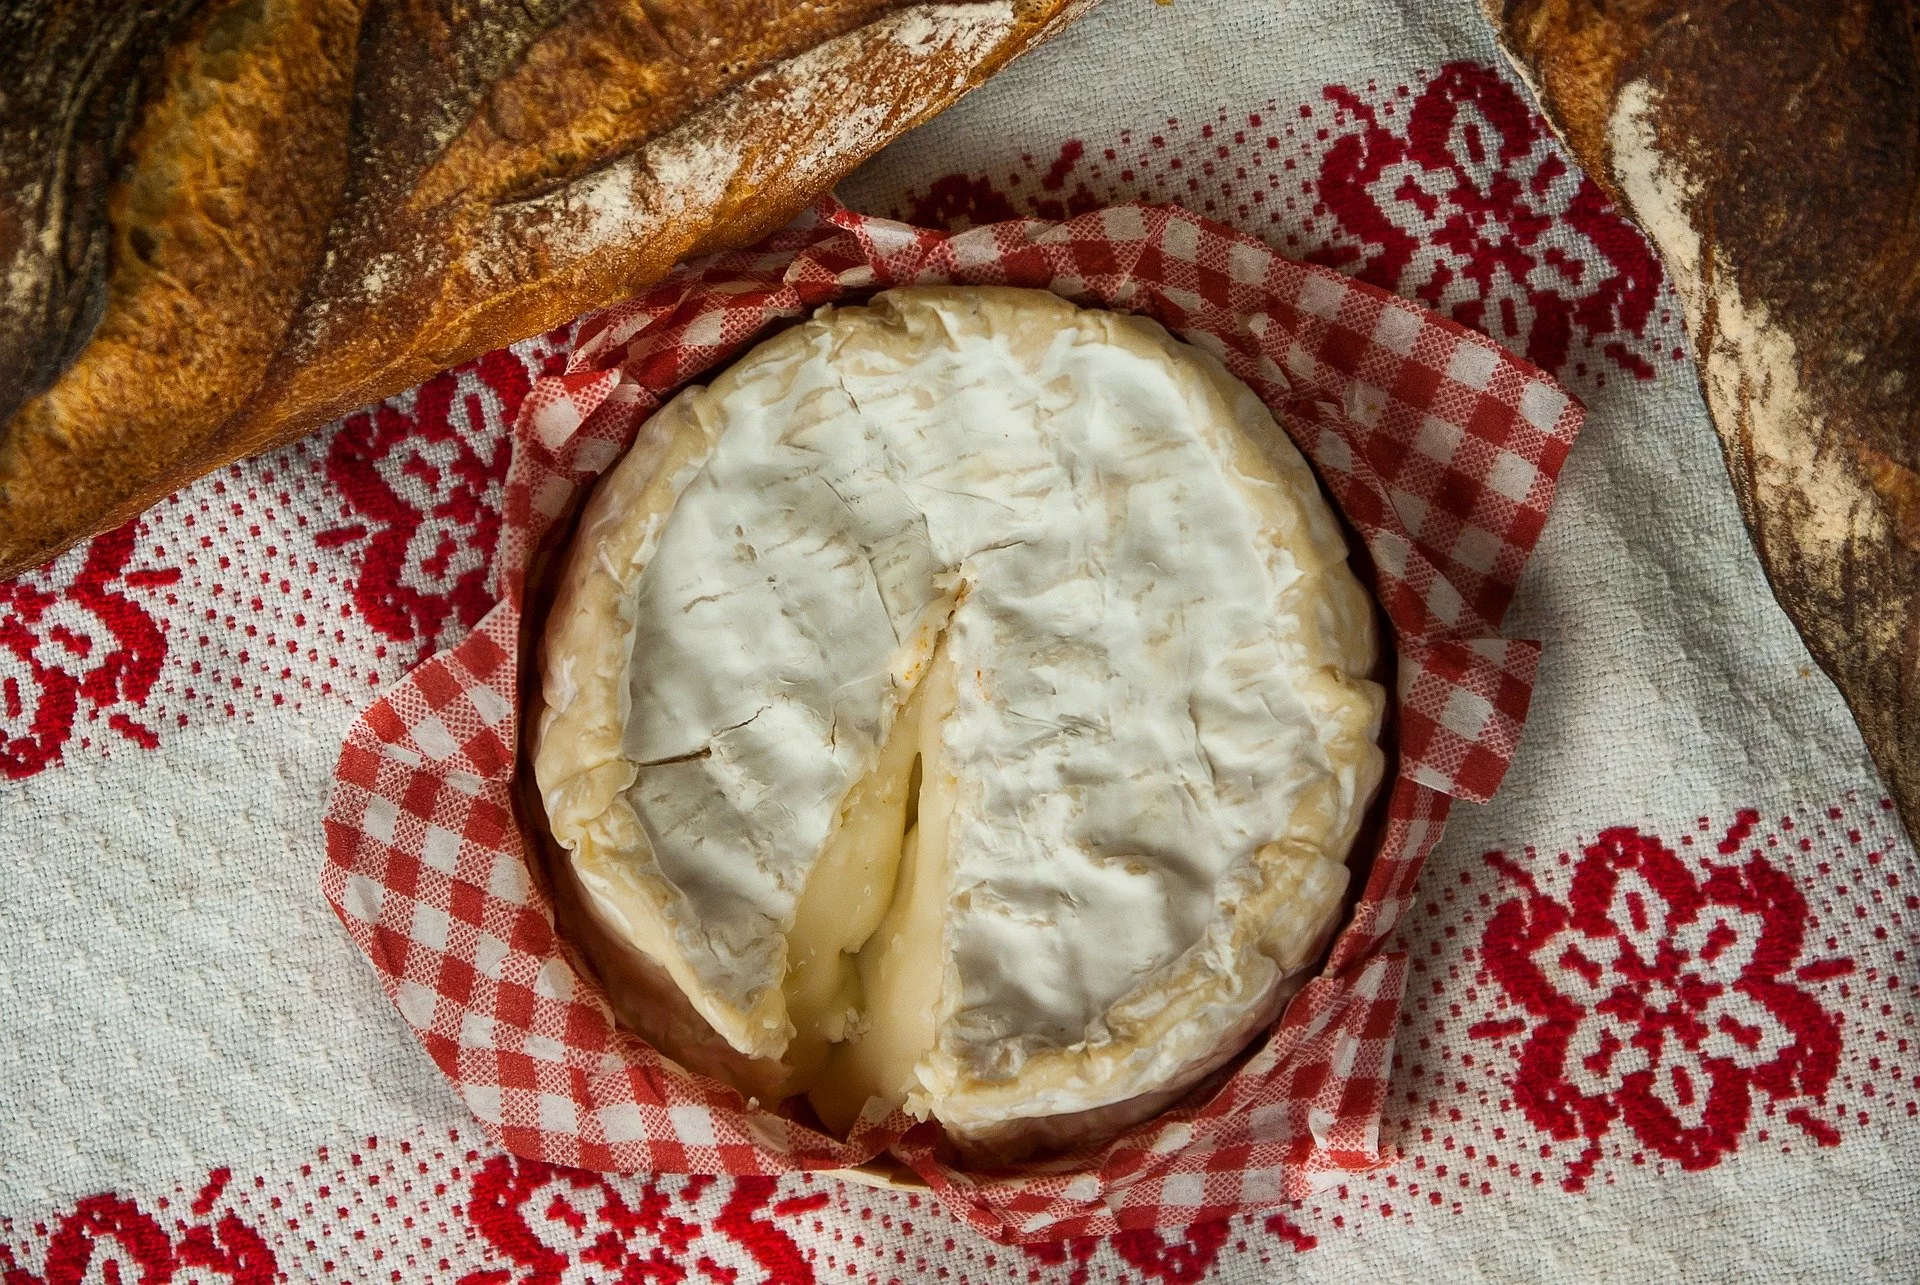 normandy cider cheese tour